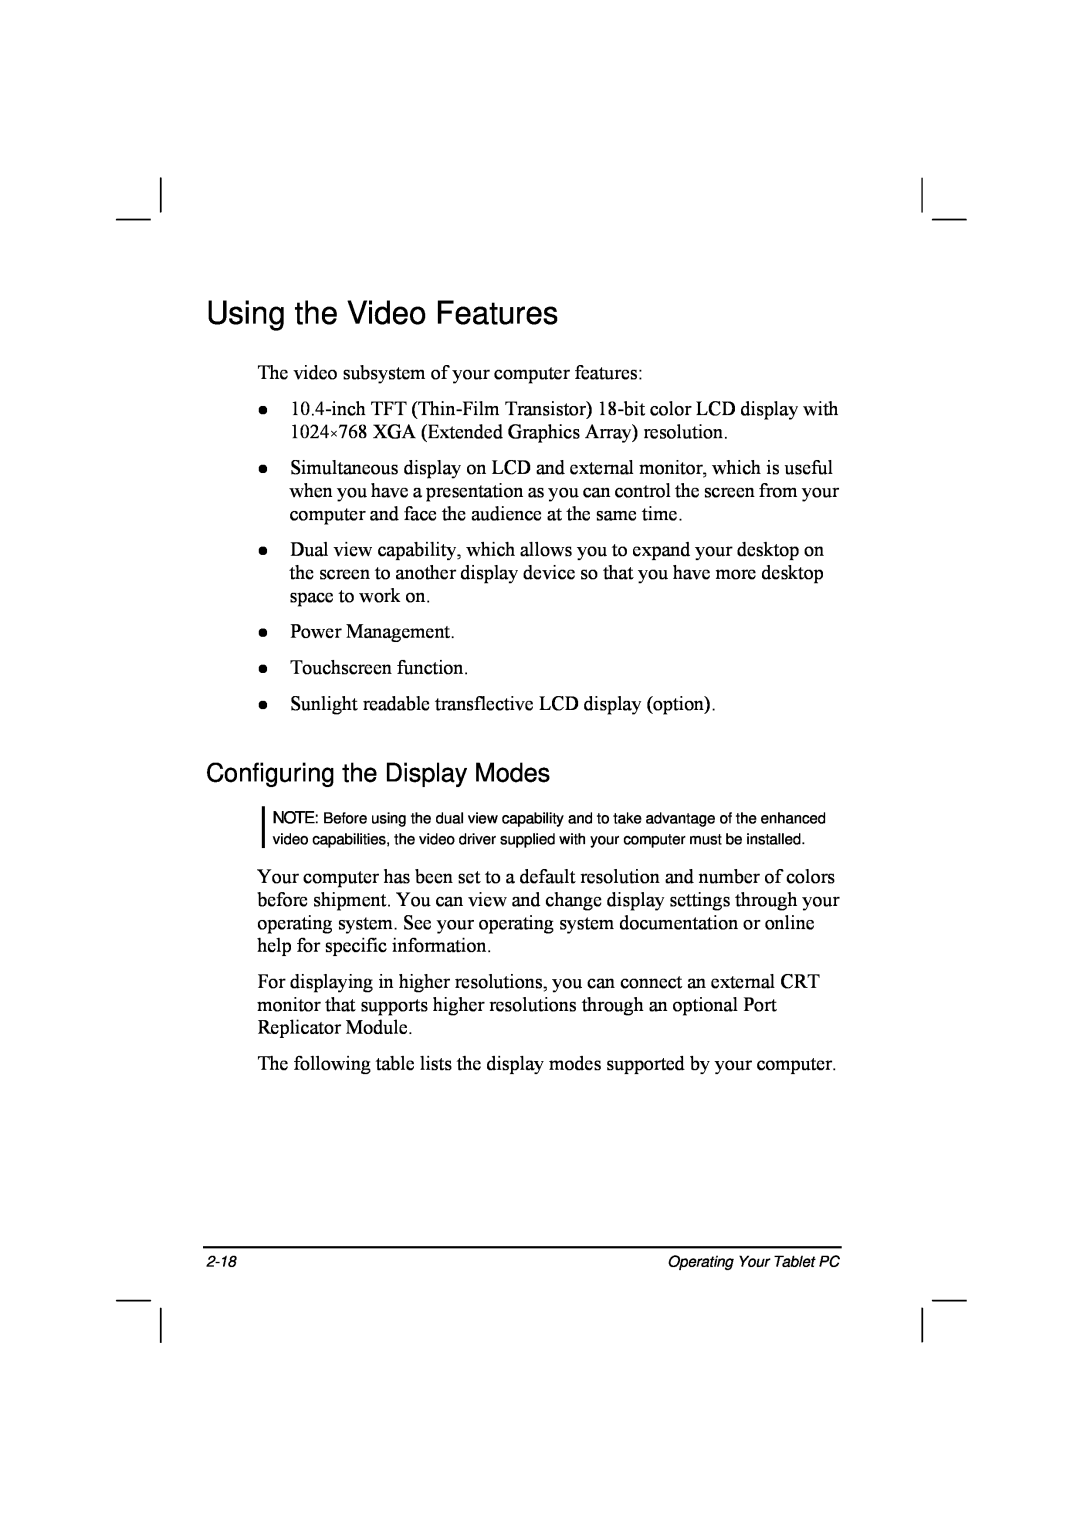 TAG 20 Series manual Using the Video Features, Configuring the Display Modes 